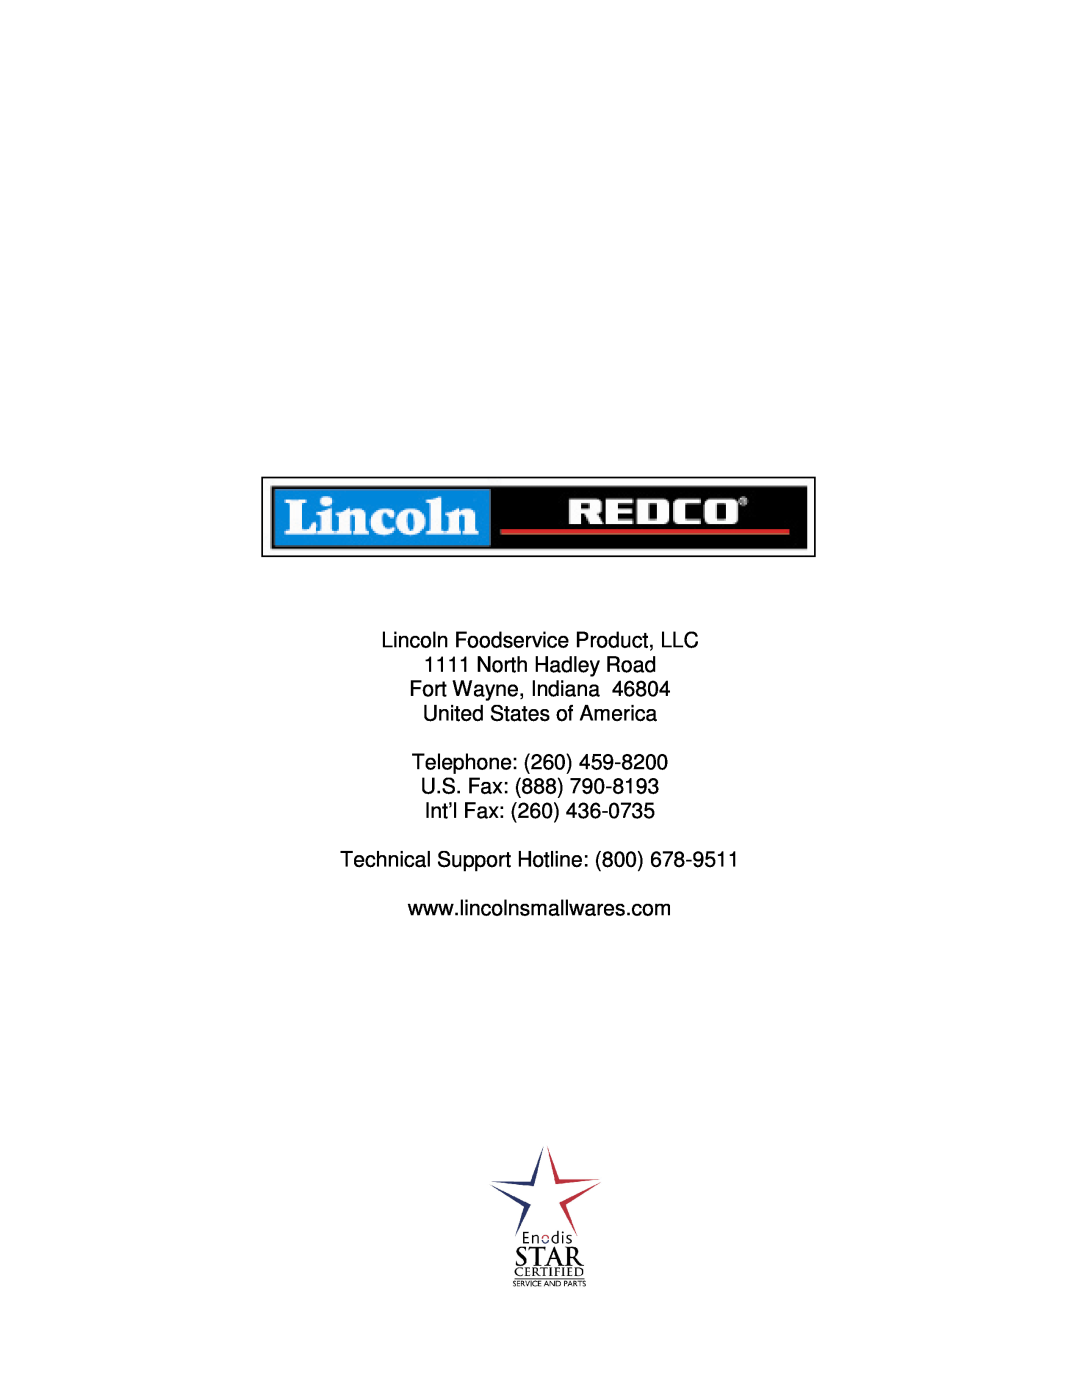 Lincoln 16900 Lincoln Foodservice Product, LLC, North Hadley Road Fort Wayne, Indiana, United States of America Telephone 